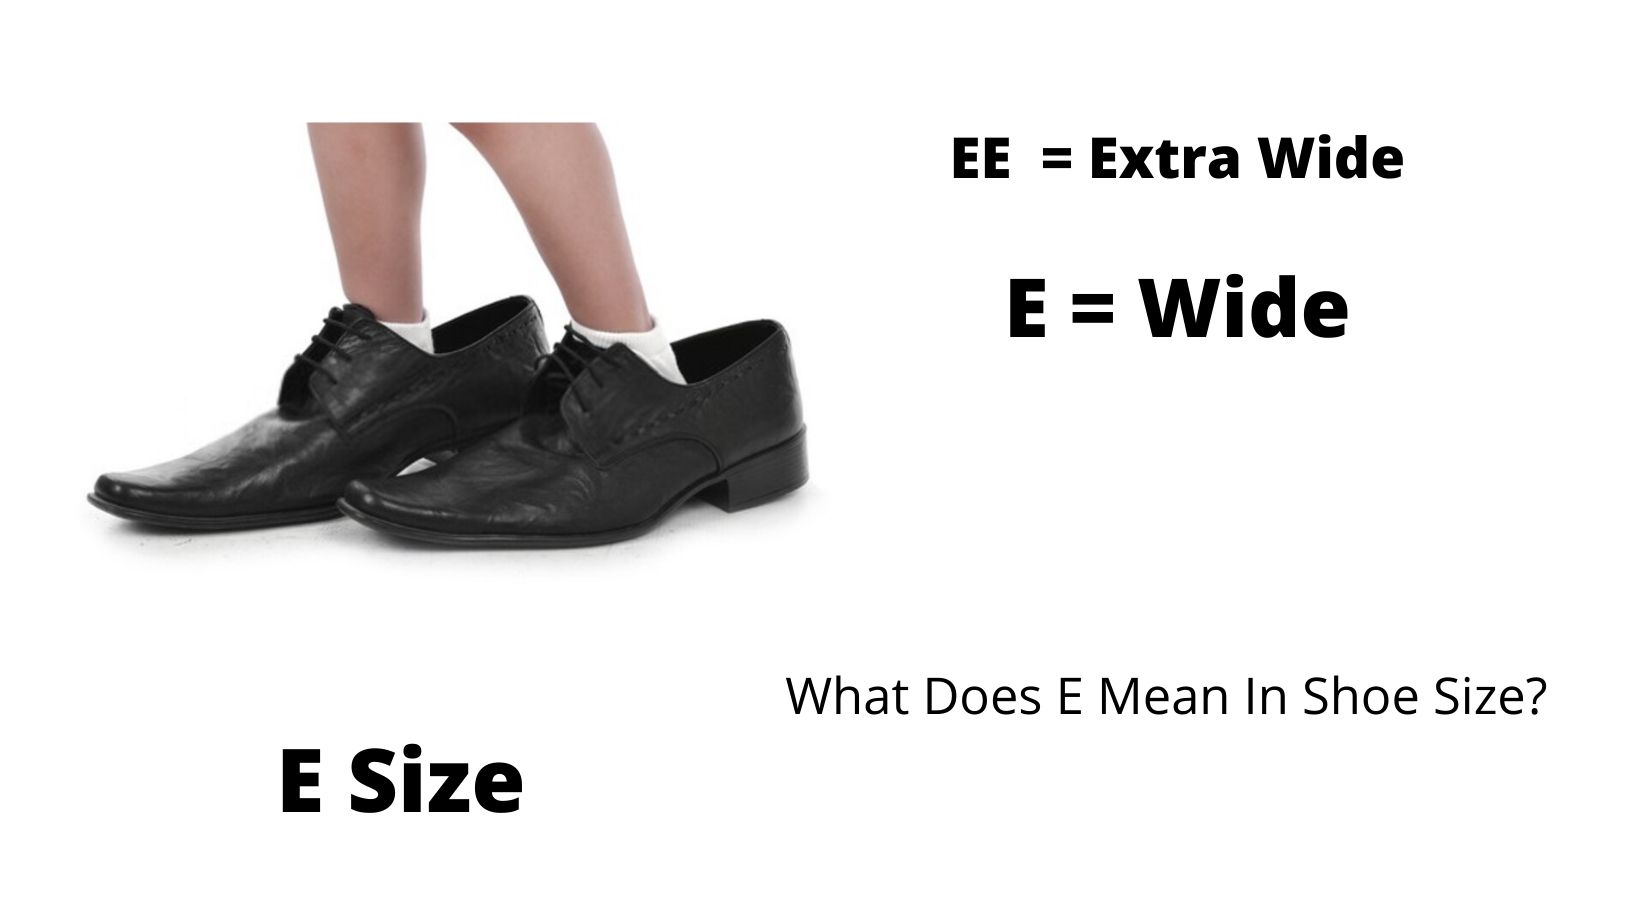 The Shoe Size Charts: What Does E Mean In Shoe Size? - Hood MWR